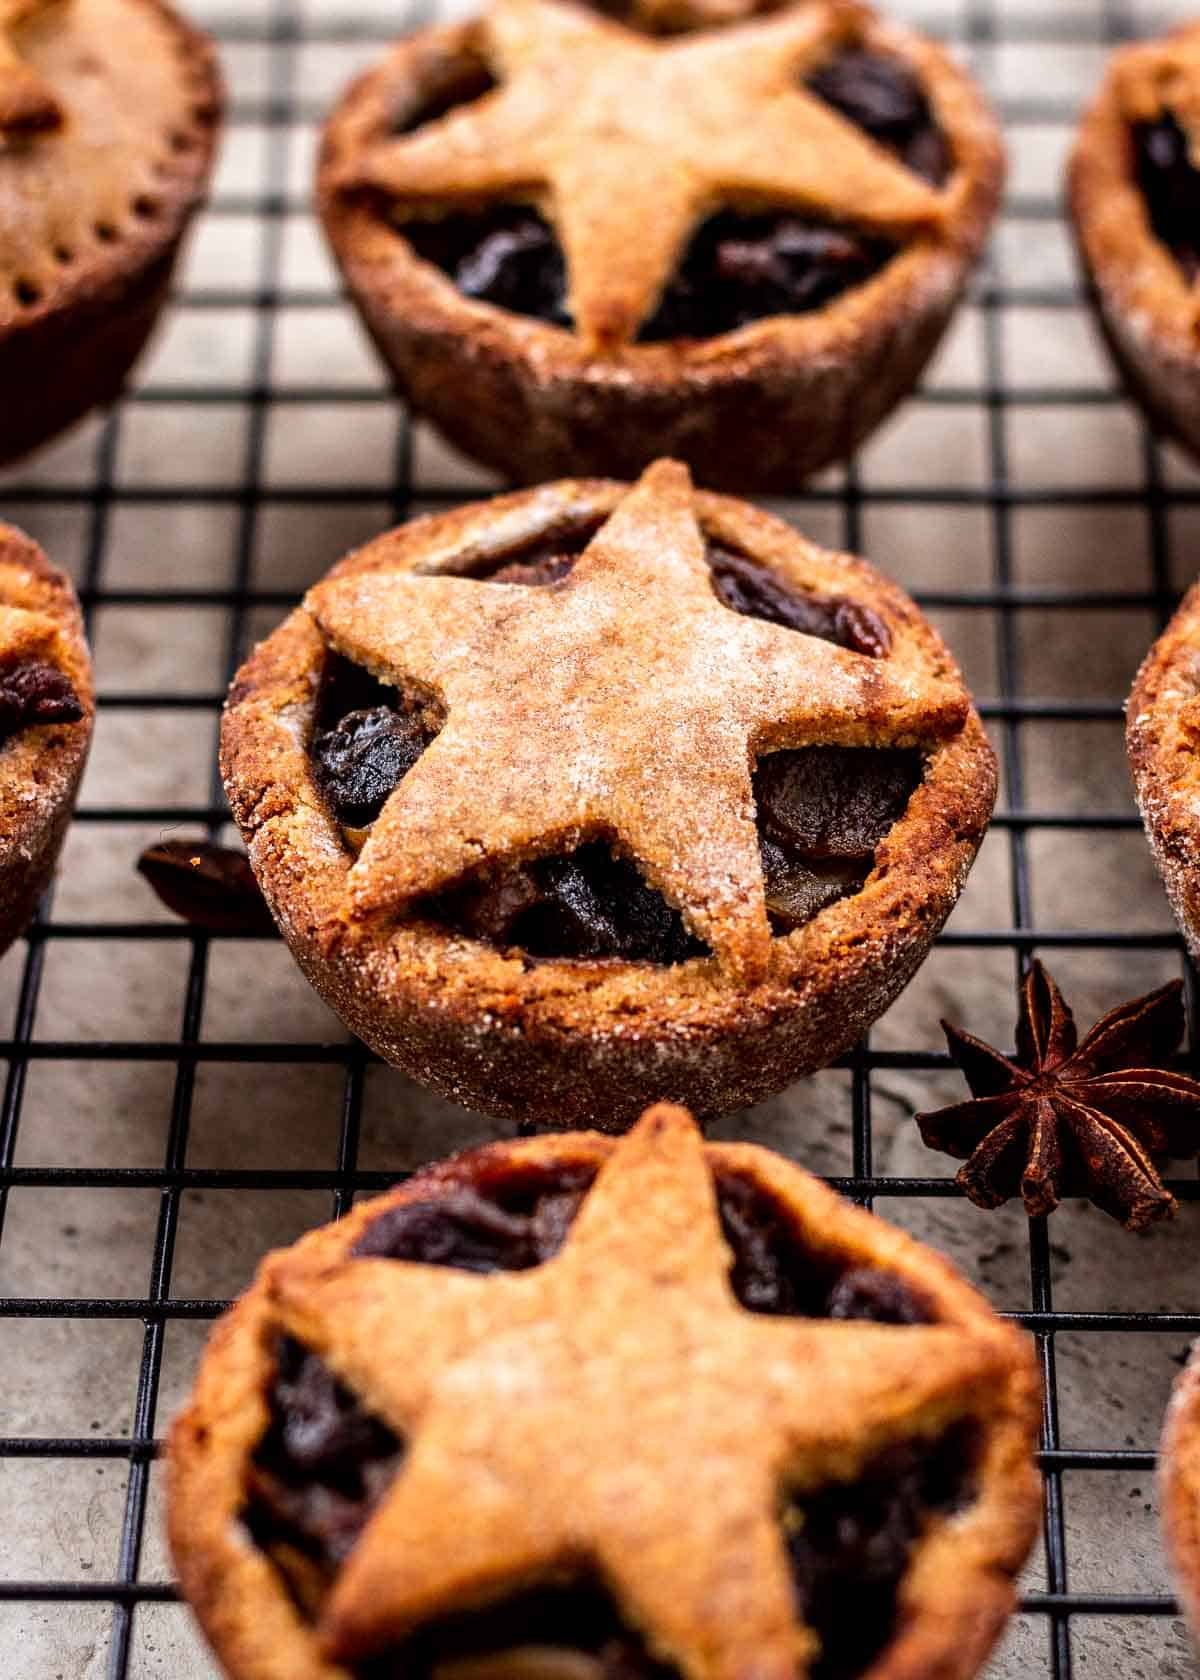 Vegan mince pies that are gluten free with pastry stars on top sit on wire cooling rack. Star anise and Christmas lights sit nearby.